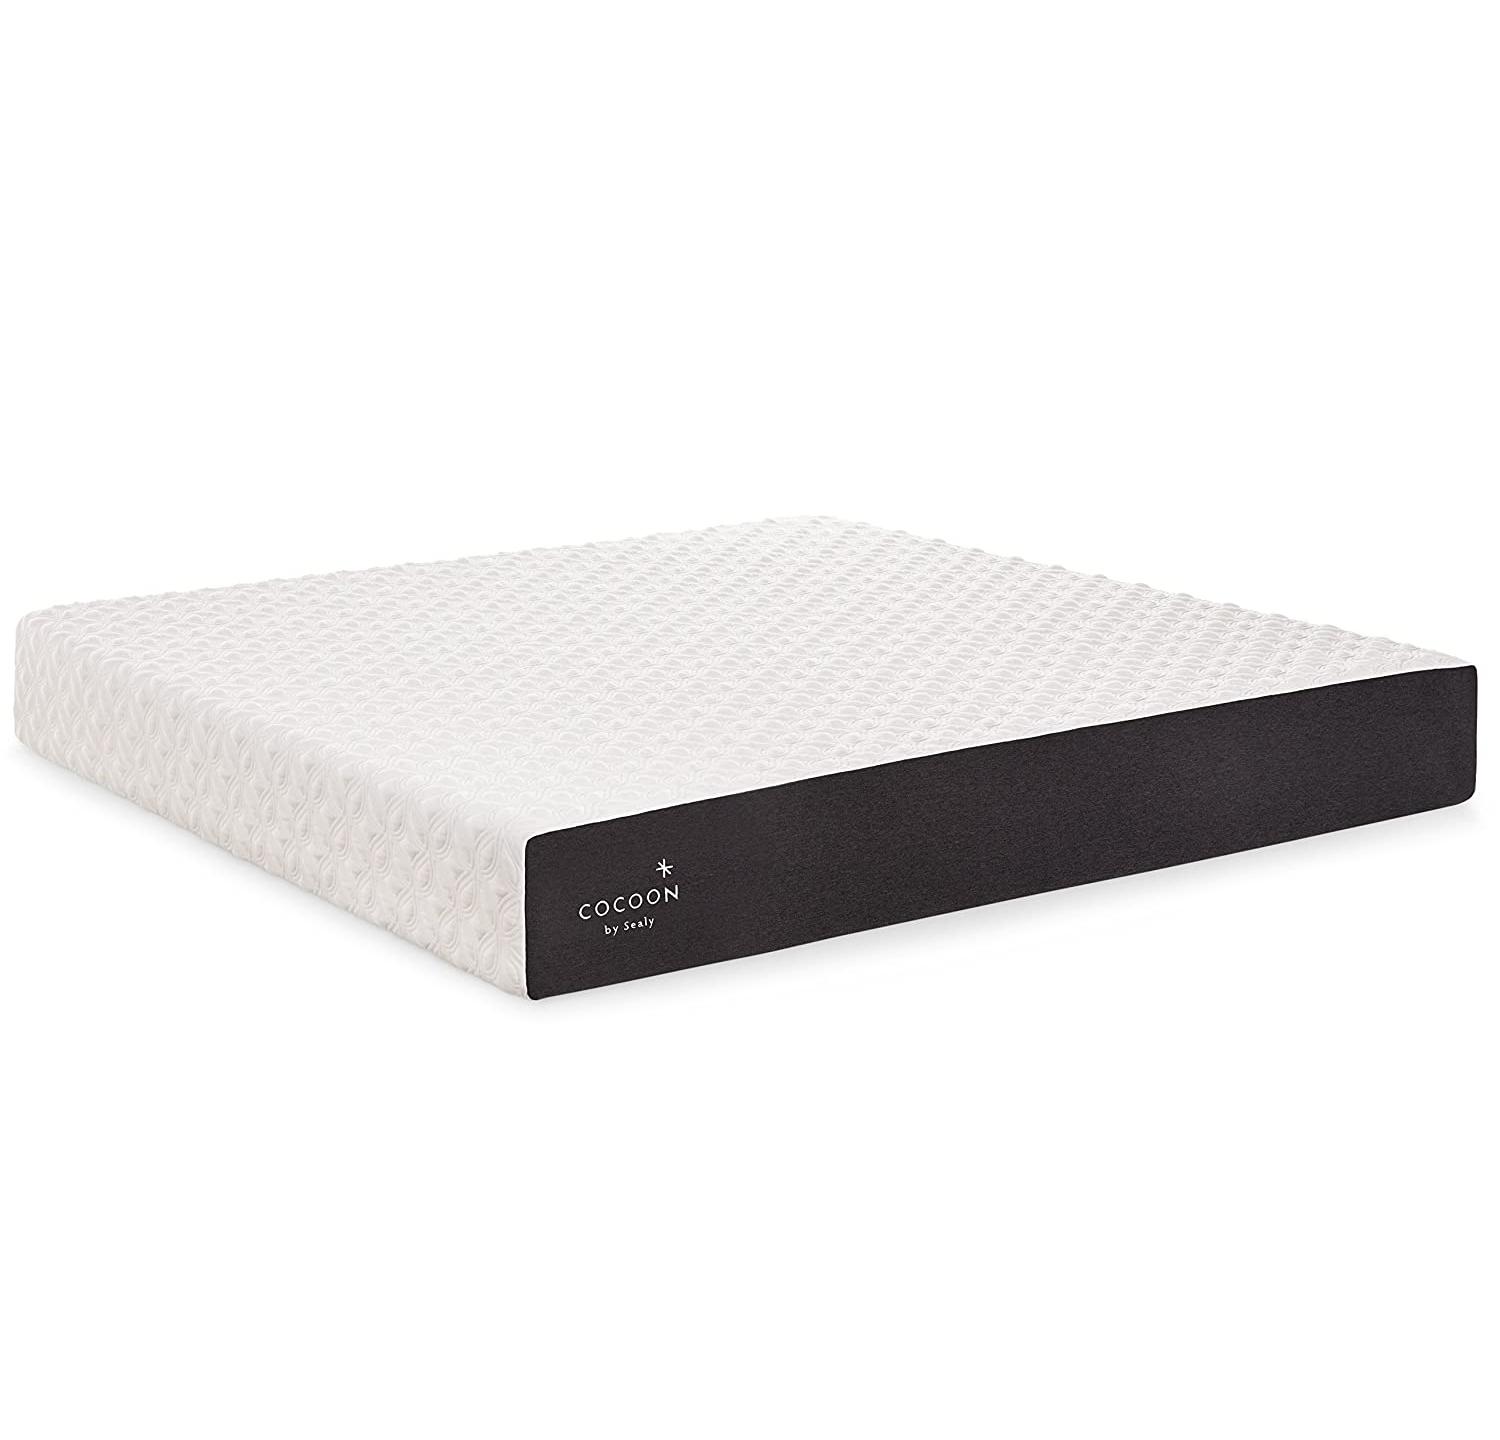 The best Cocoon by Sealy mattress sales, deals and discounts: image shows the Cocoon by Sealy Chill Hybrid with a black base and white quilted top